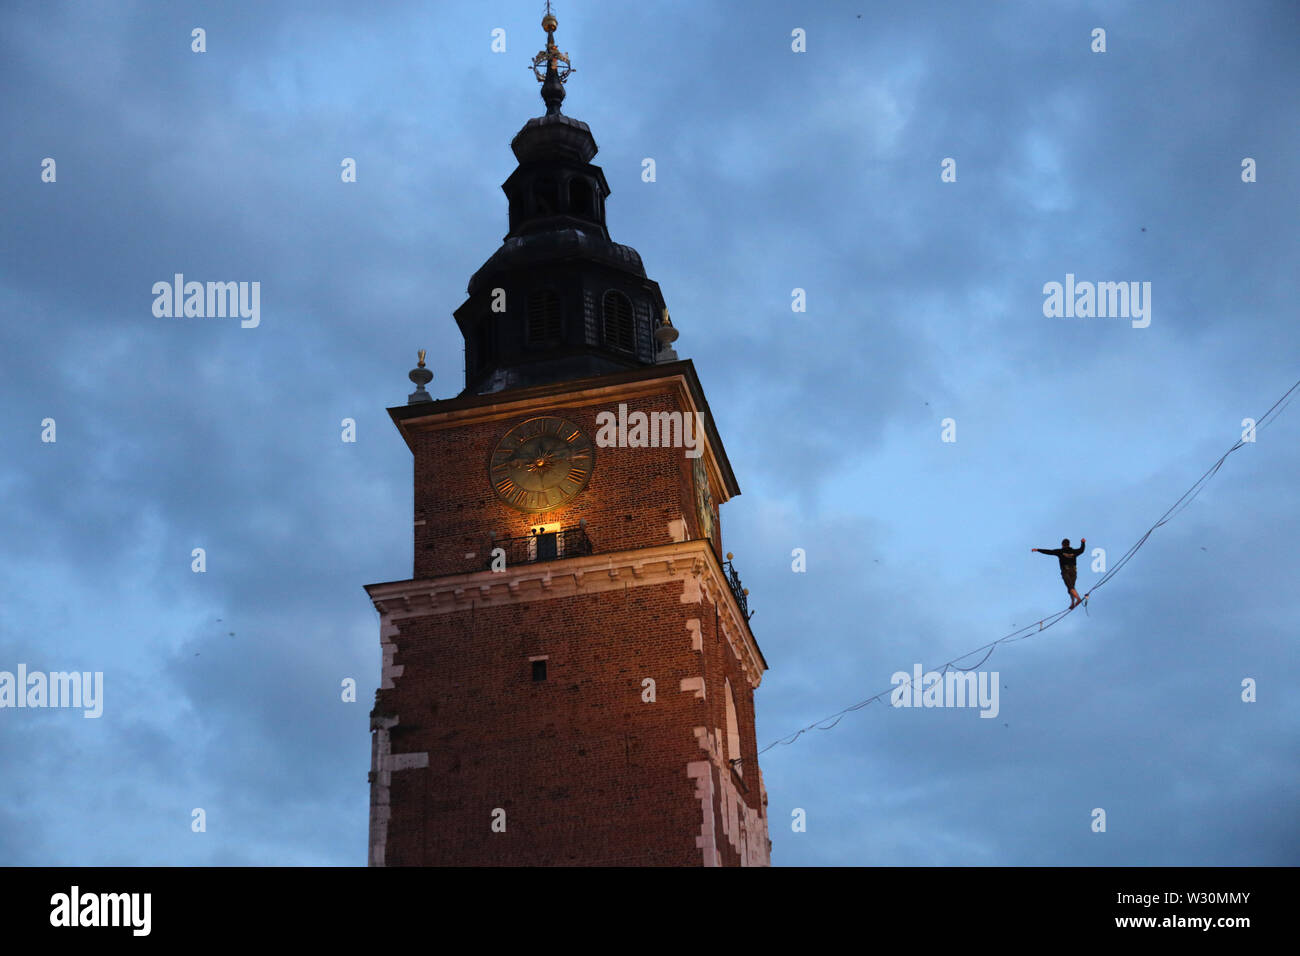 Cracow. Krakow. Poland. Street Theatre FestivaI. International annual event, meeting of street performing artists. Grand Finale. Tightrope walker. Stock Photo